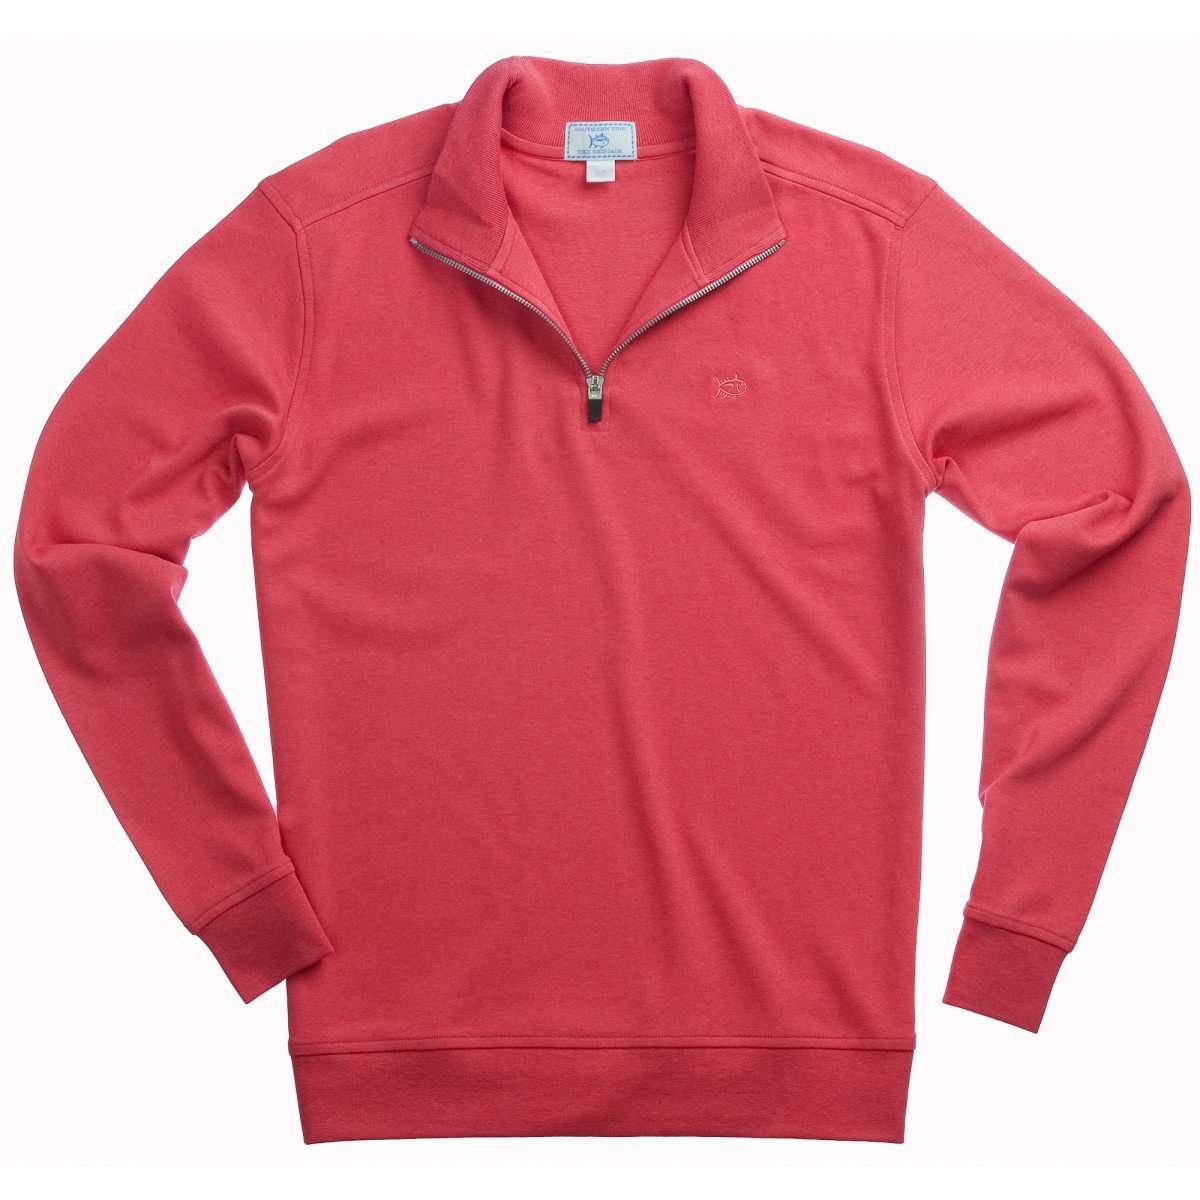 Newport Heather Lightweight 1/4 Zip Pullover in Antifouling Red by Southern Tide - Country Club Prep